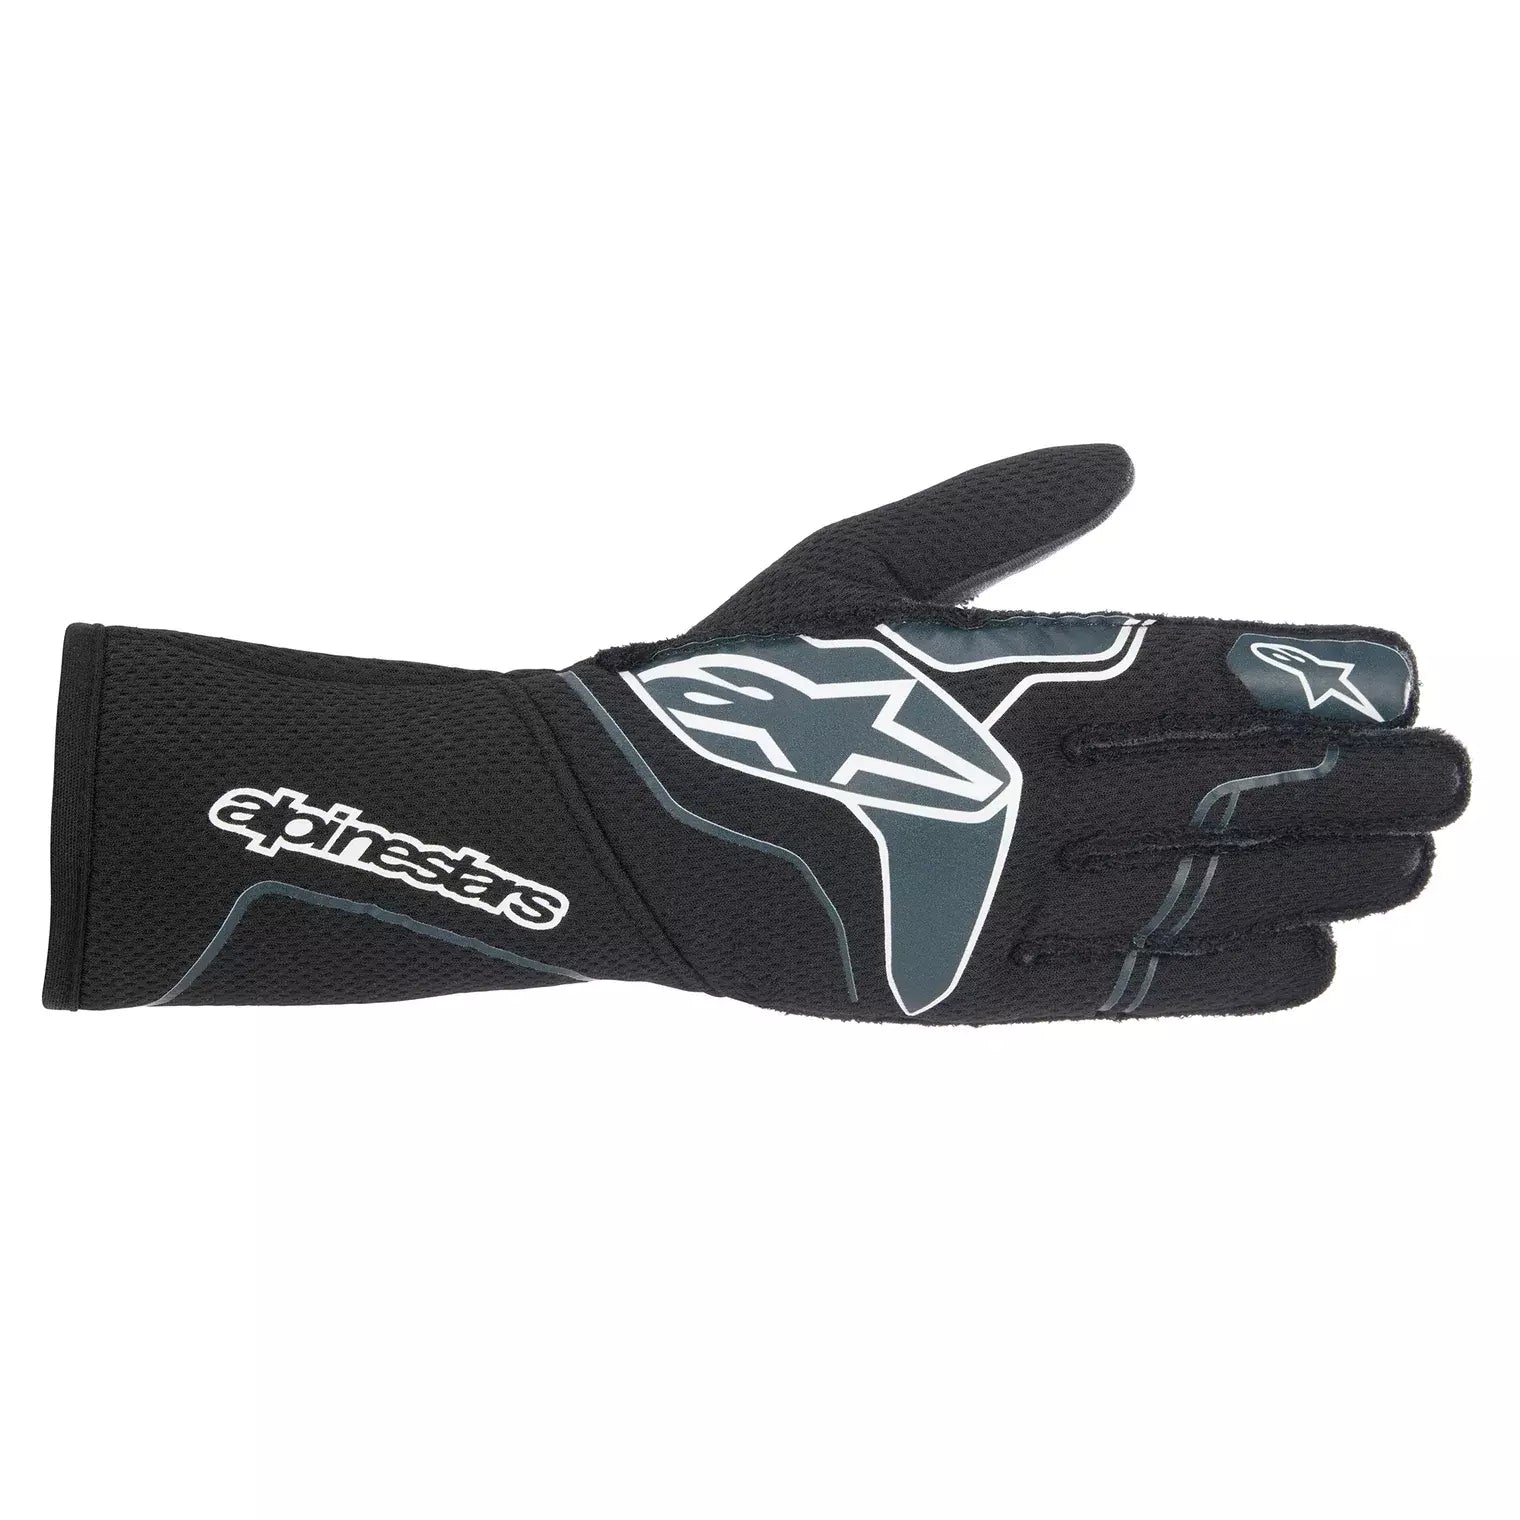 Alpinestars Gloves Tech 1-ZX Black / Grey X-Large Safety Clothing Driving Gloves main image